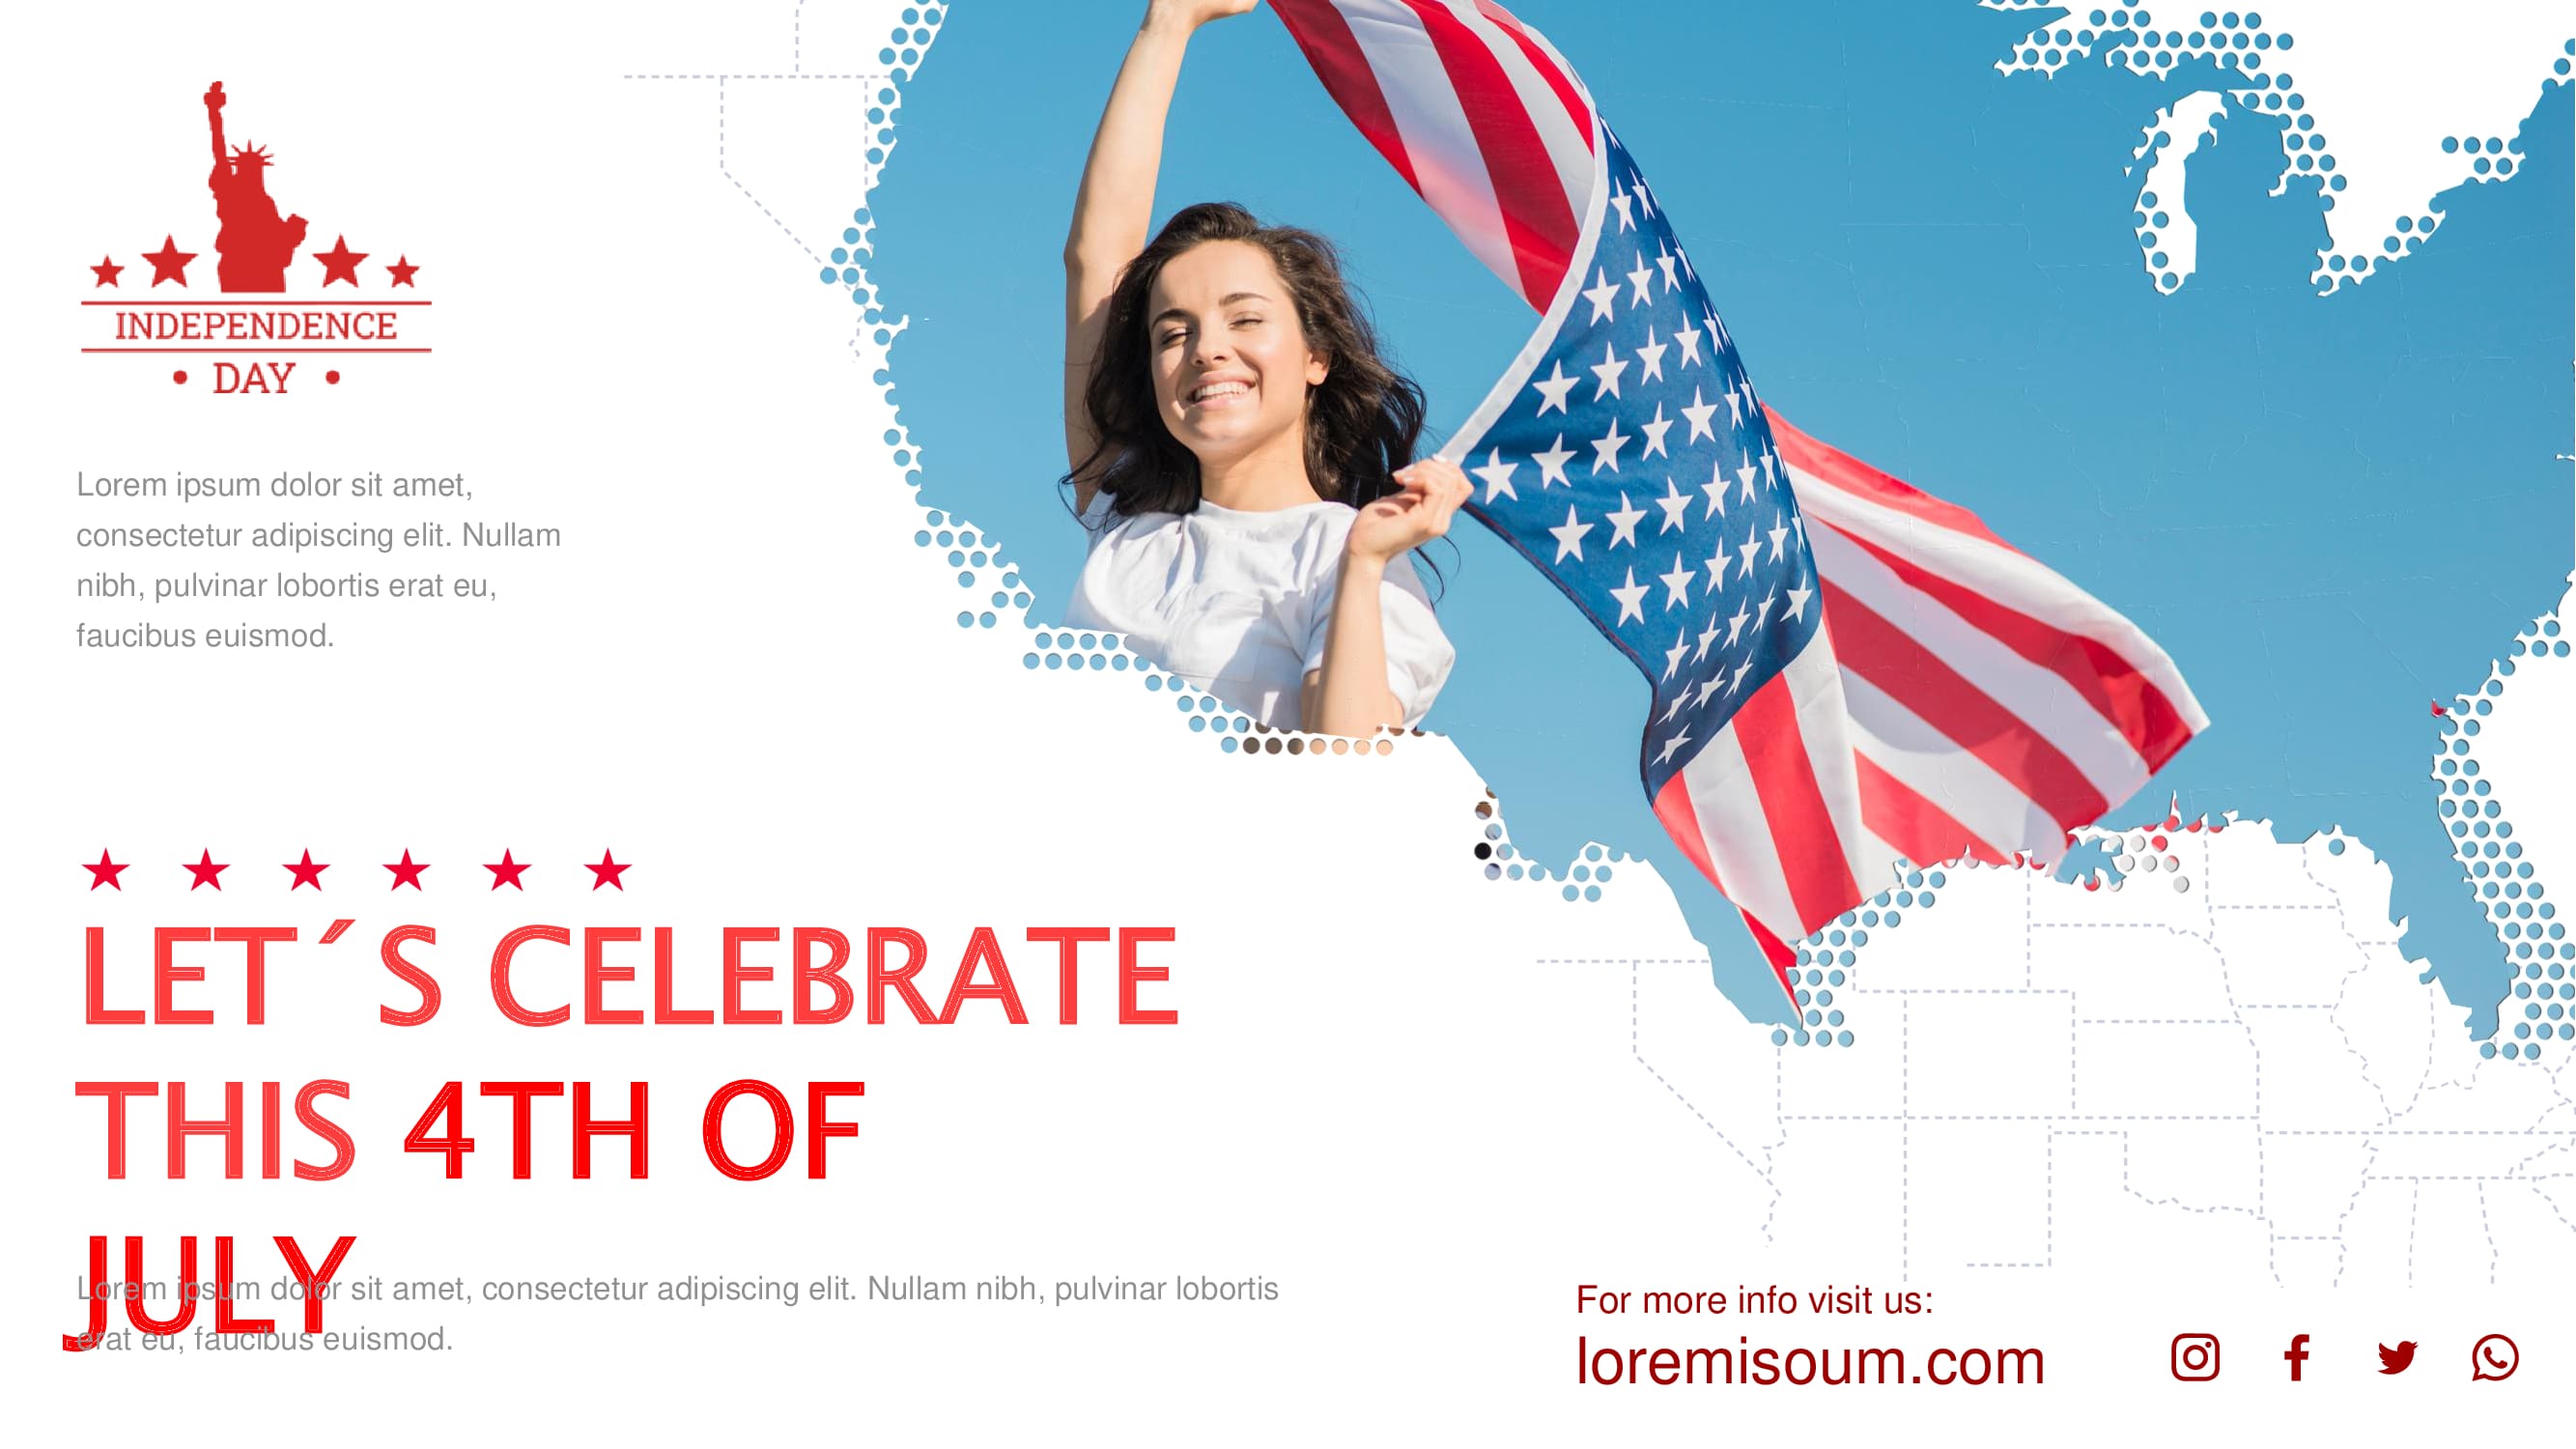 Title slide with red lettering and image of a girl with USA flag.